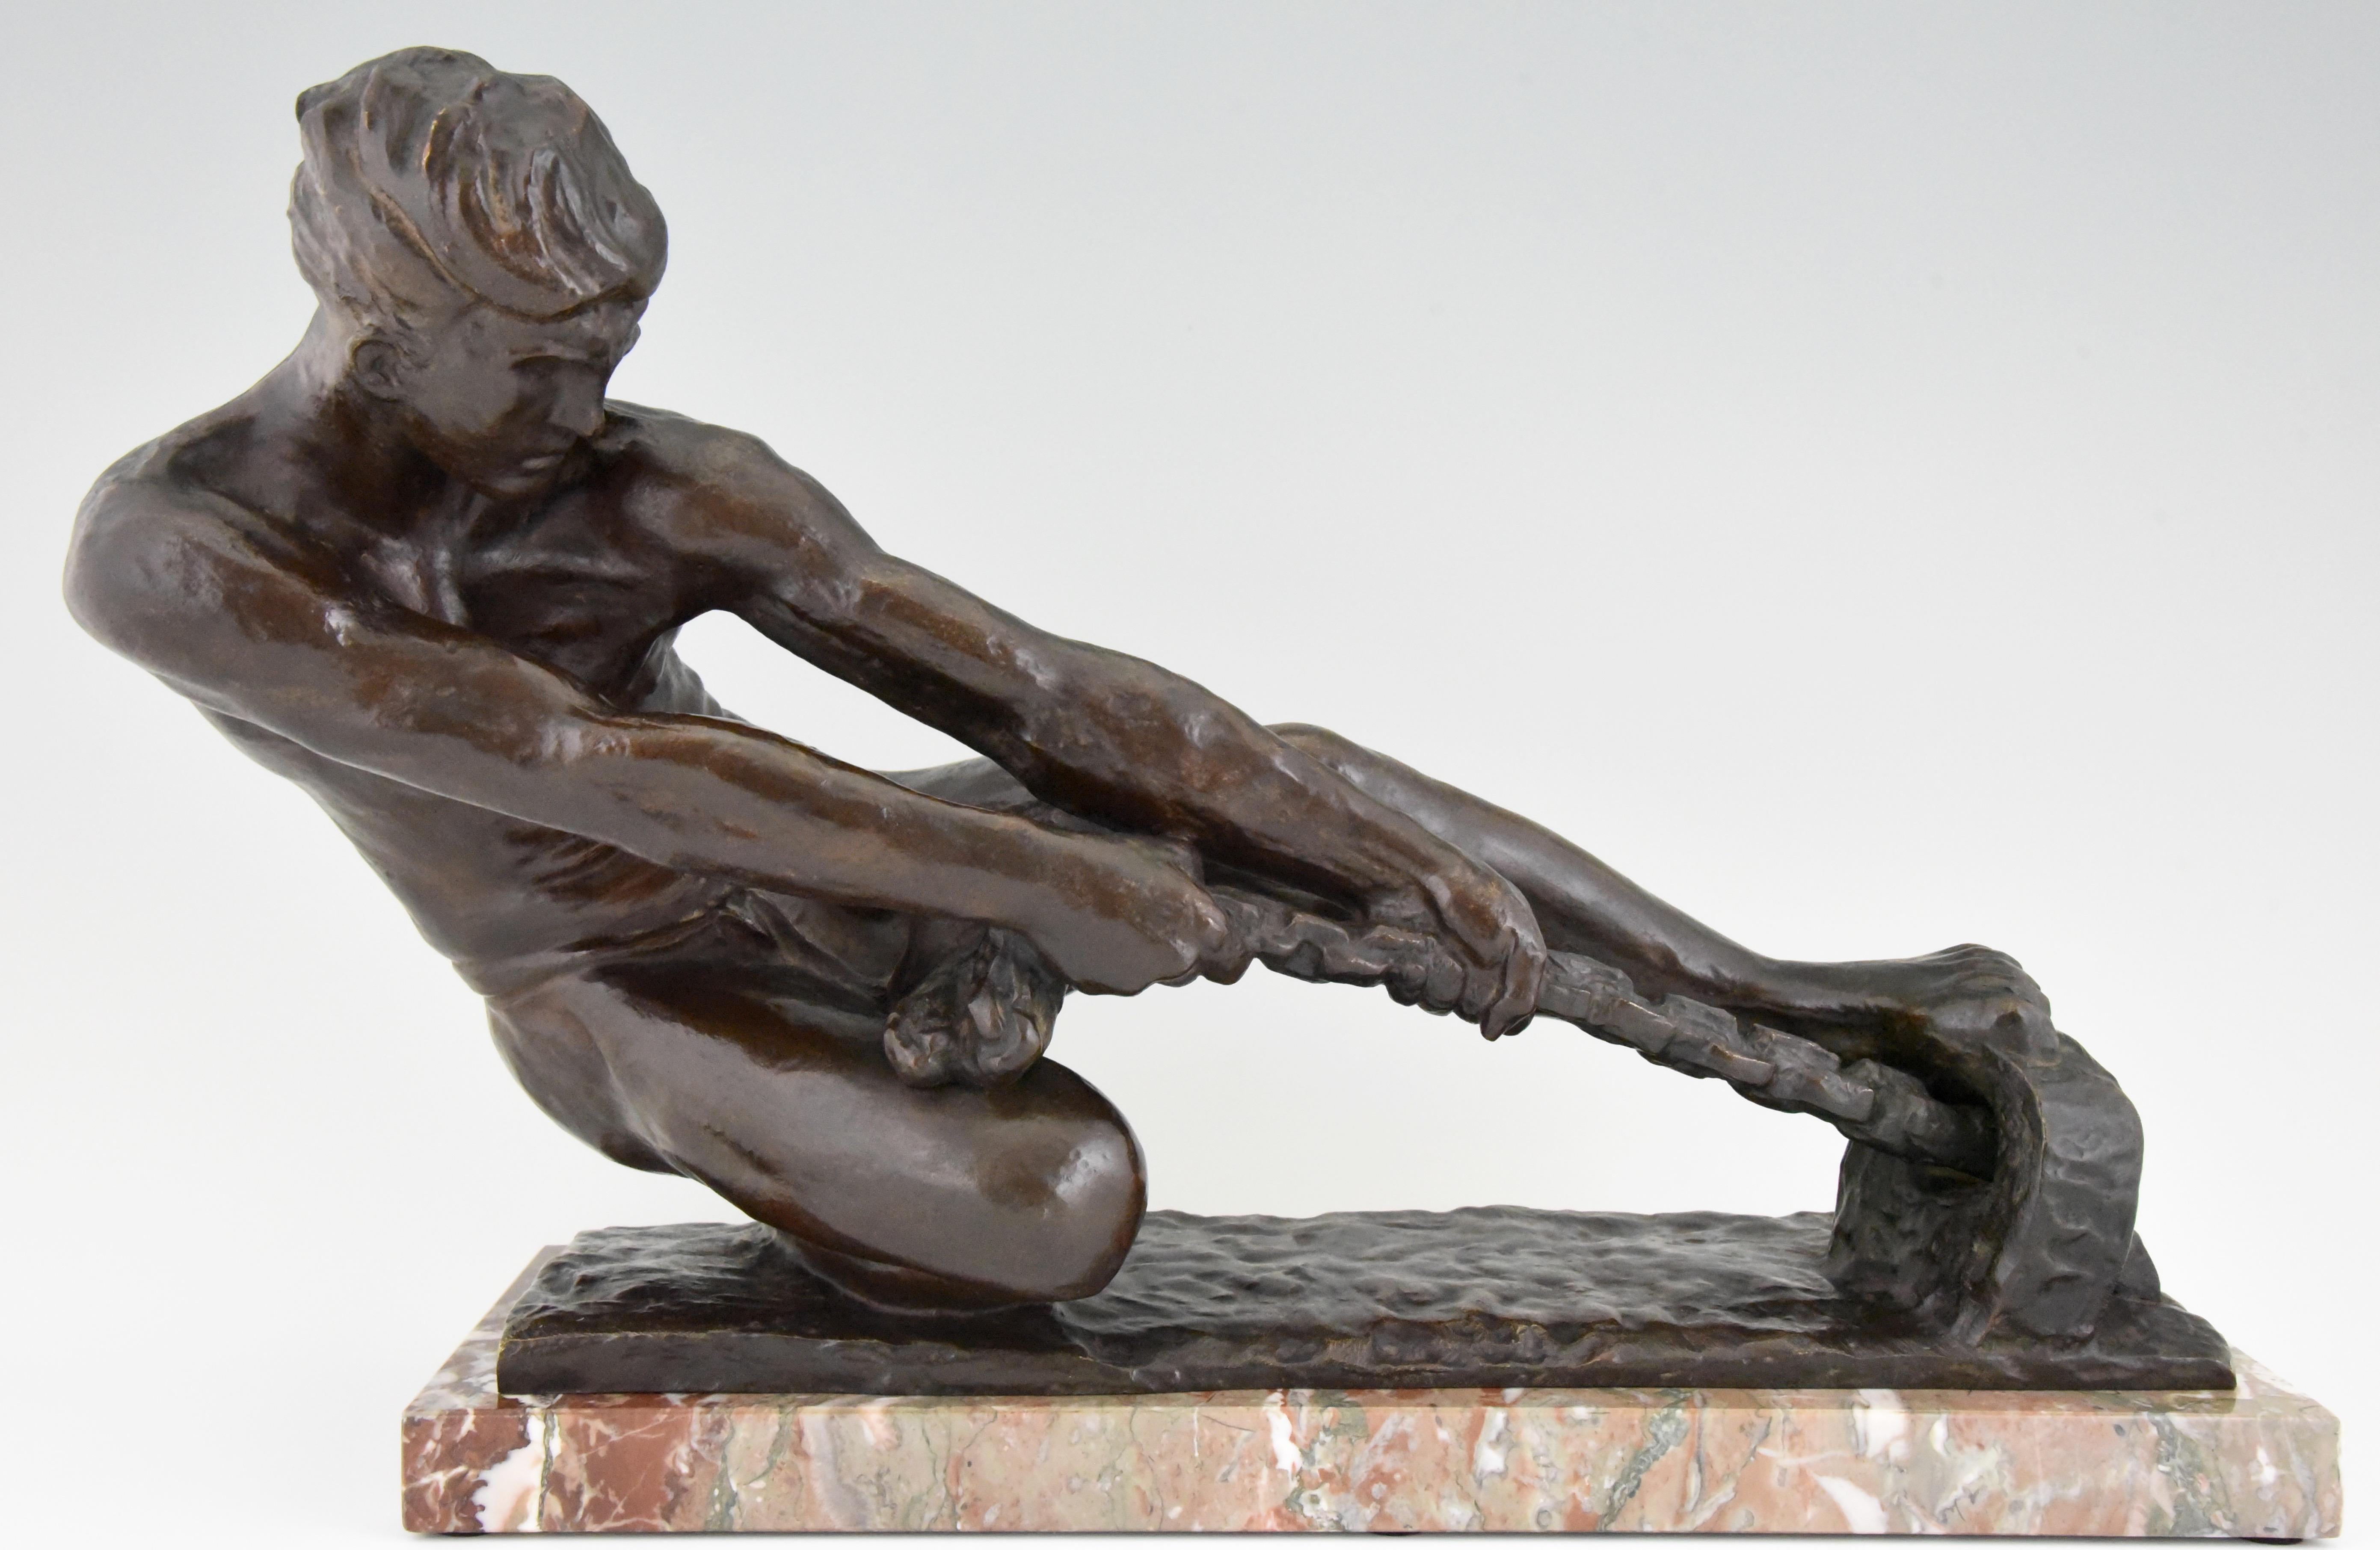 Art Deco bronze sculpture of a athletic young man pulling a rope by the French artist Alexandre Kelety. The bronze has a lovely dark brown patina and is mounted on a marble base. The sculpture is signed Kelety and has the Etling foundry mark,